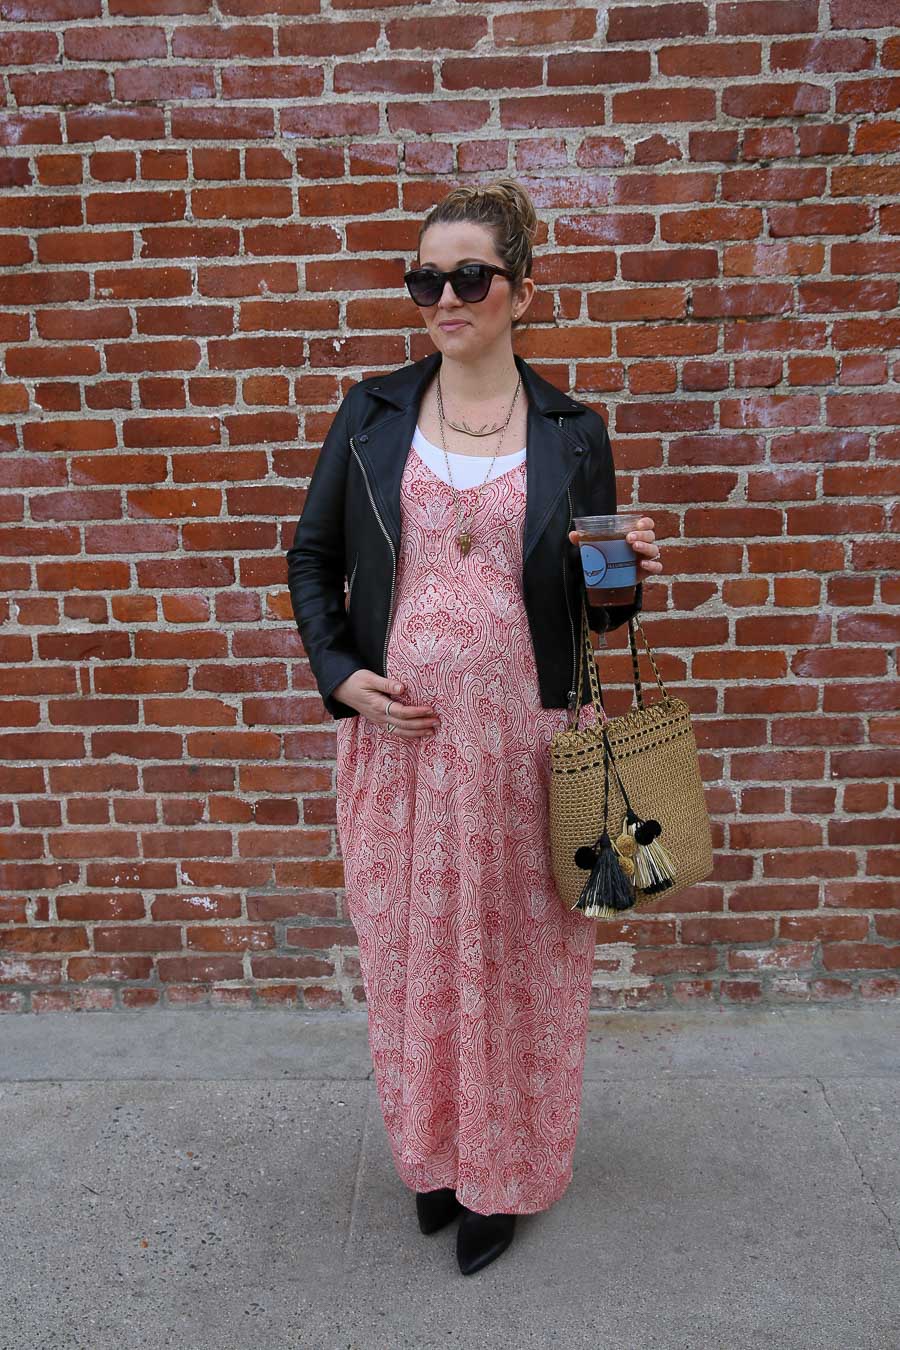 Cute Pregnancy Outfit - Maxi Dress and Leather Jacket - Leather Jacket Outfits